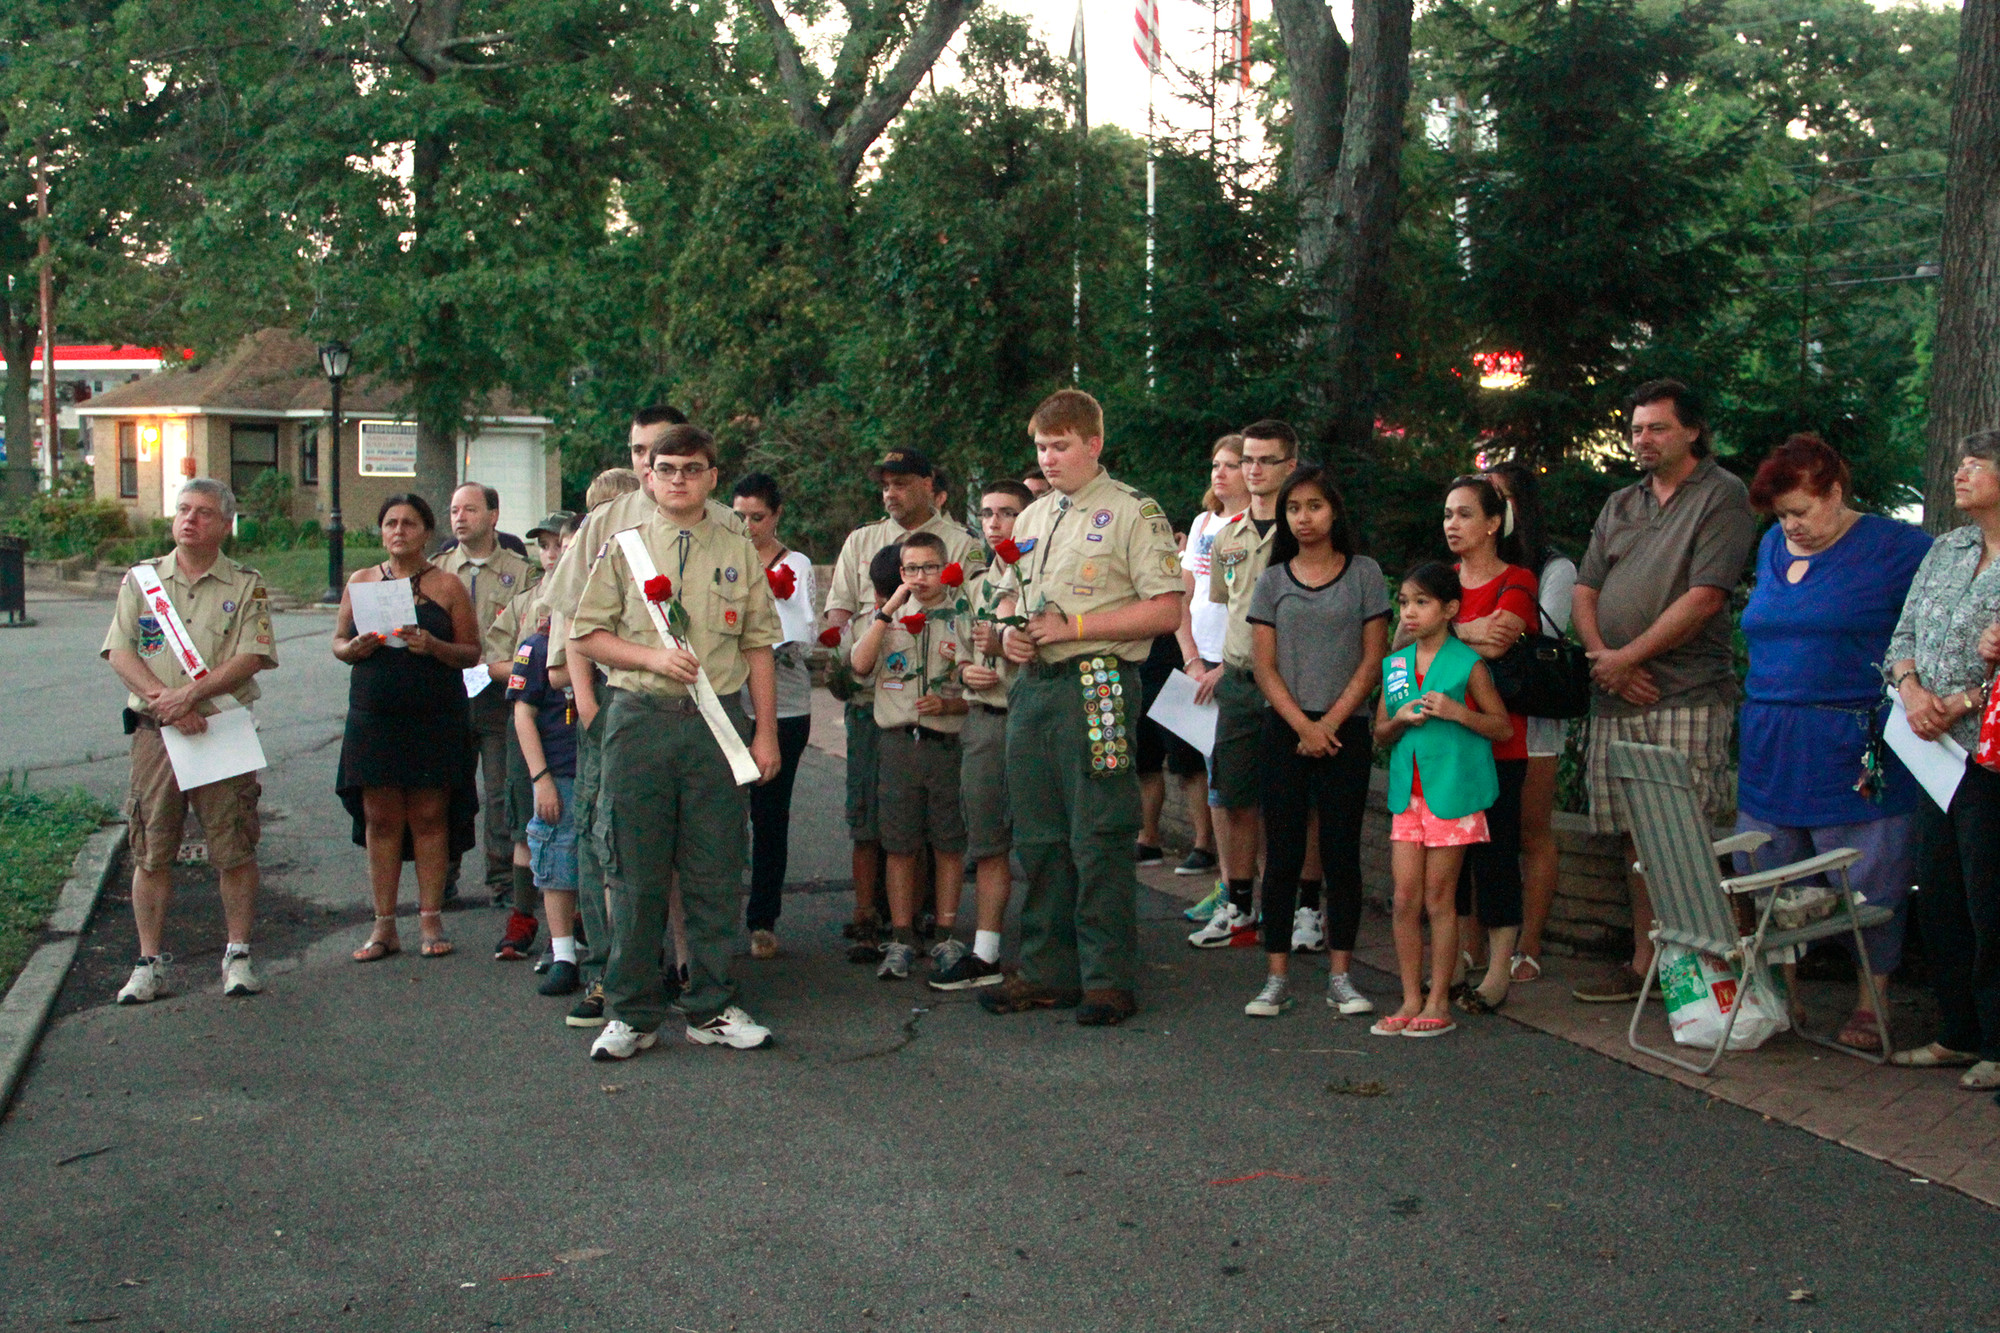 Boy Scout Troop 240 waited to place their flowers at the 9/11 Memorial.